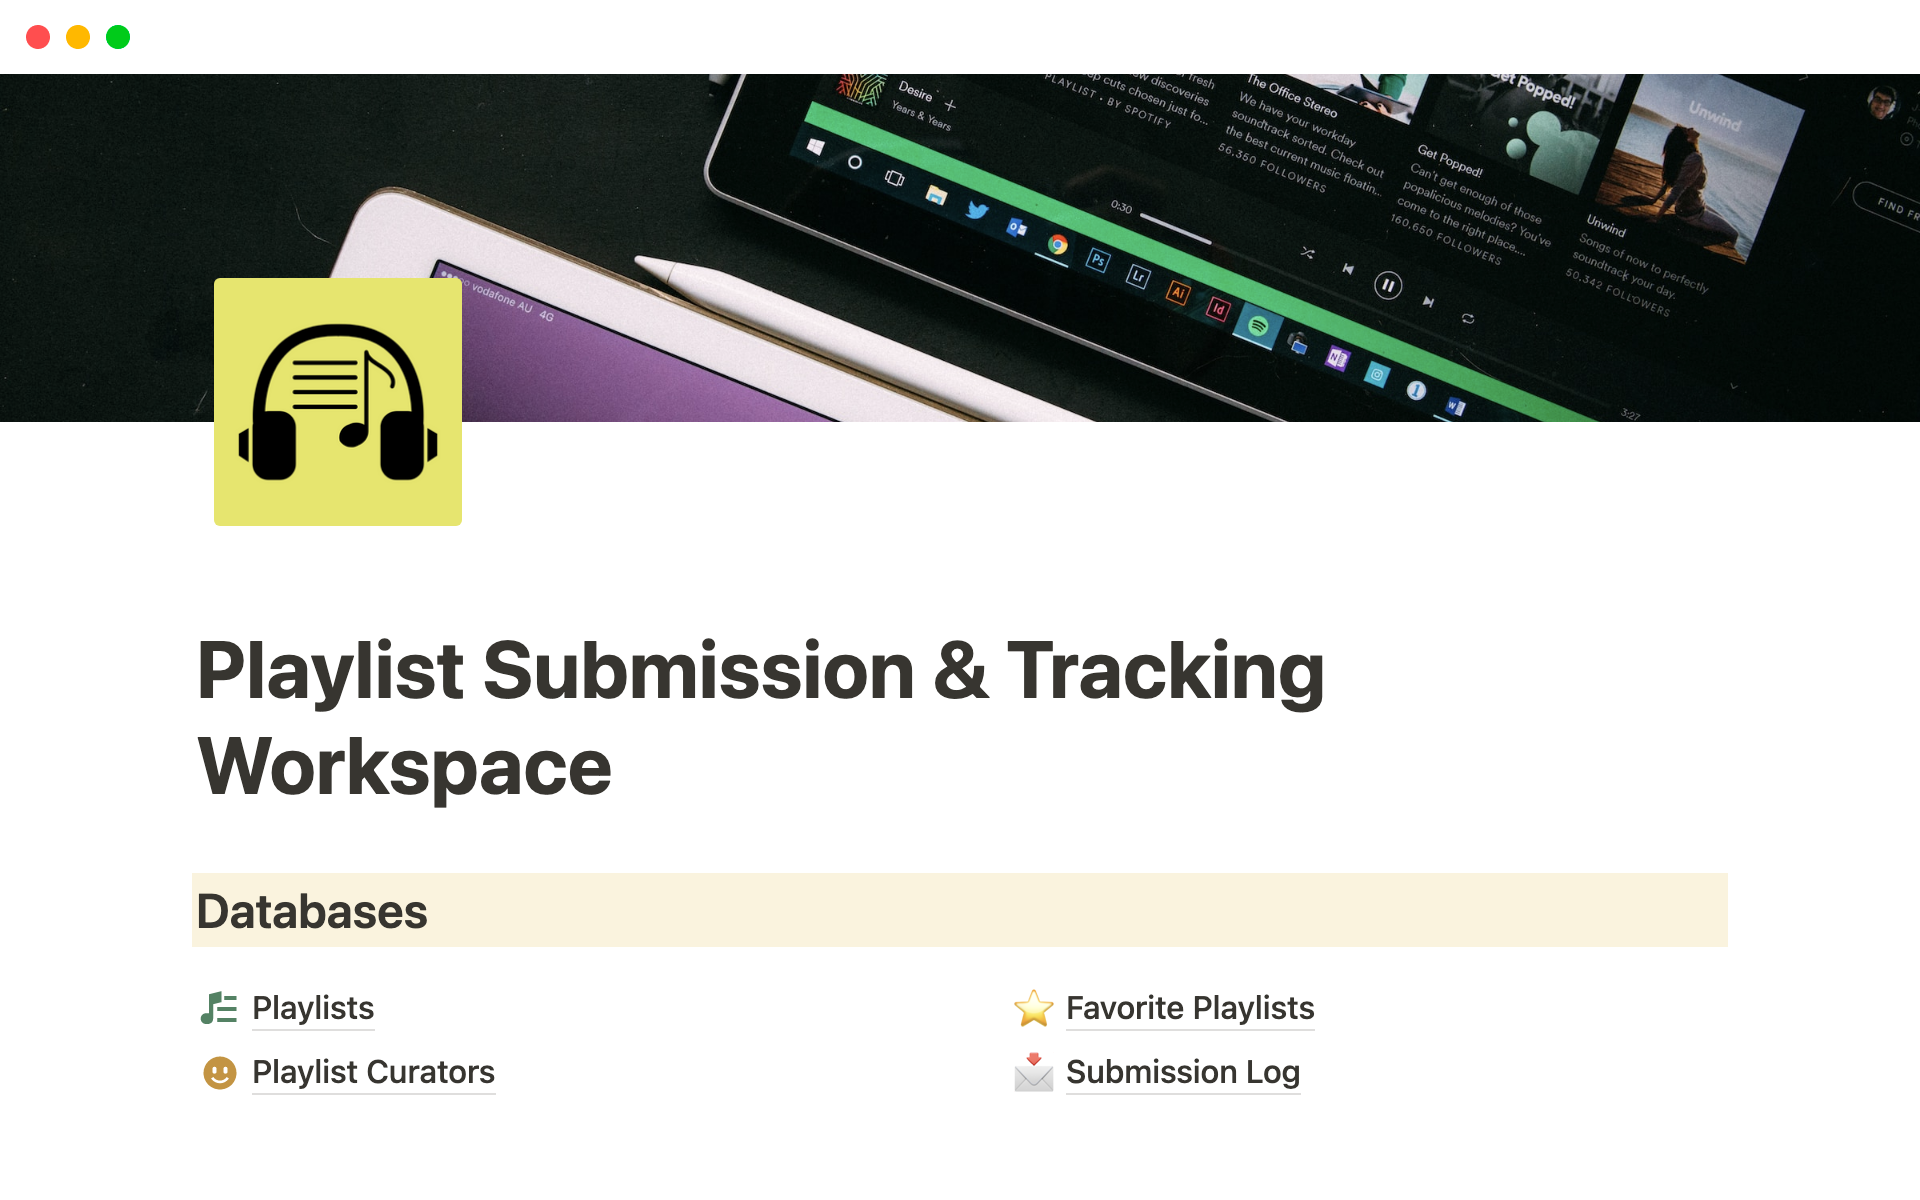 Help indie musicians, artists and producers keep track of their submissions to curated playlists, making it easy to plan, manage and track the progress of their submissions.